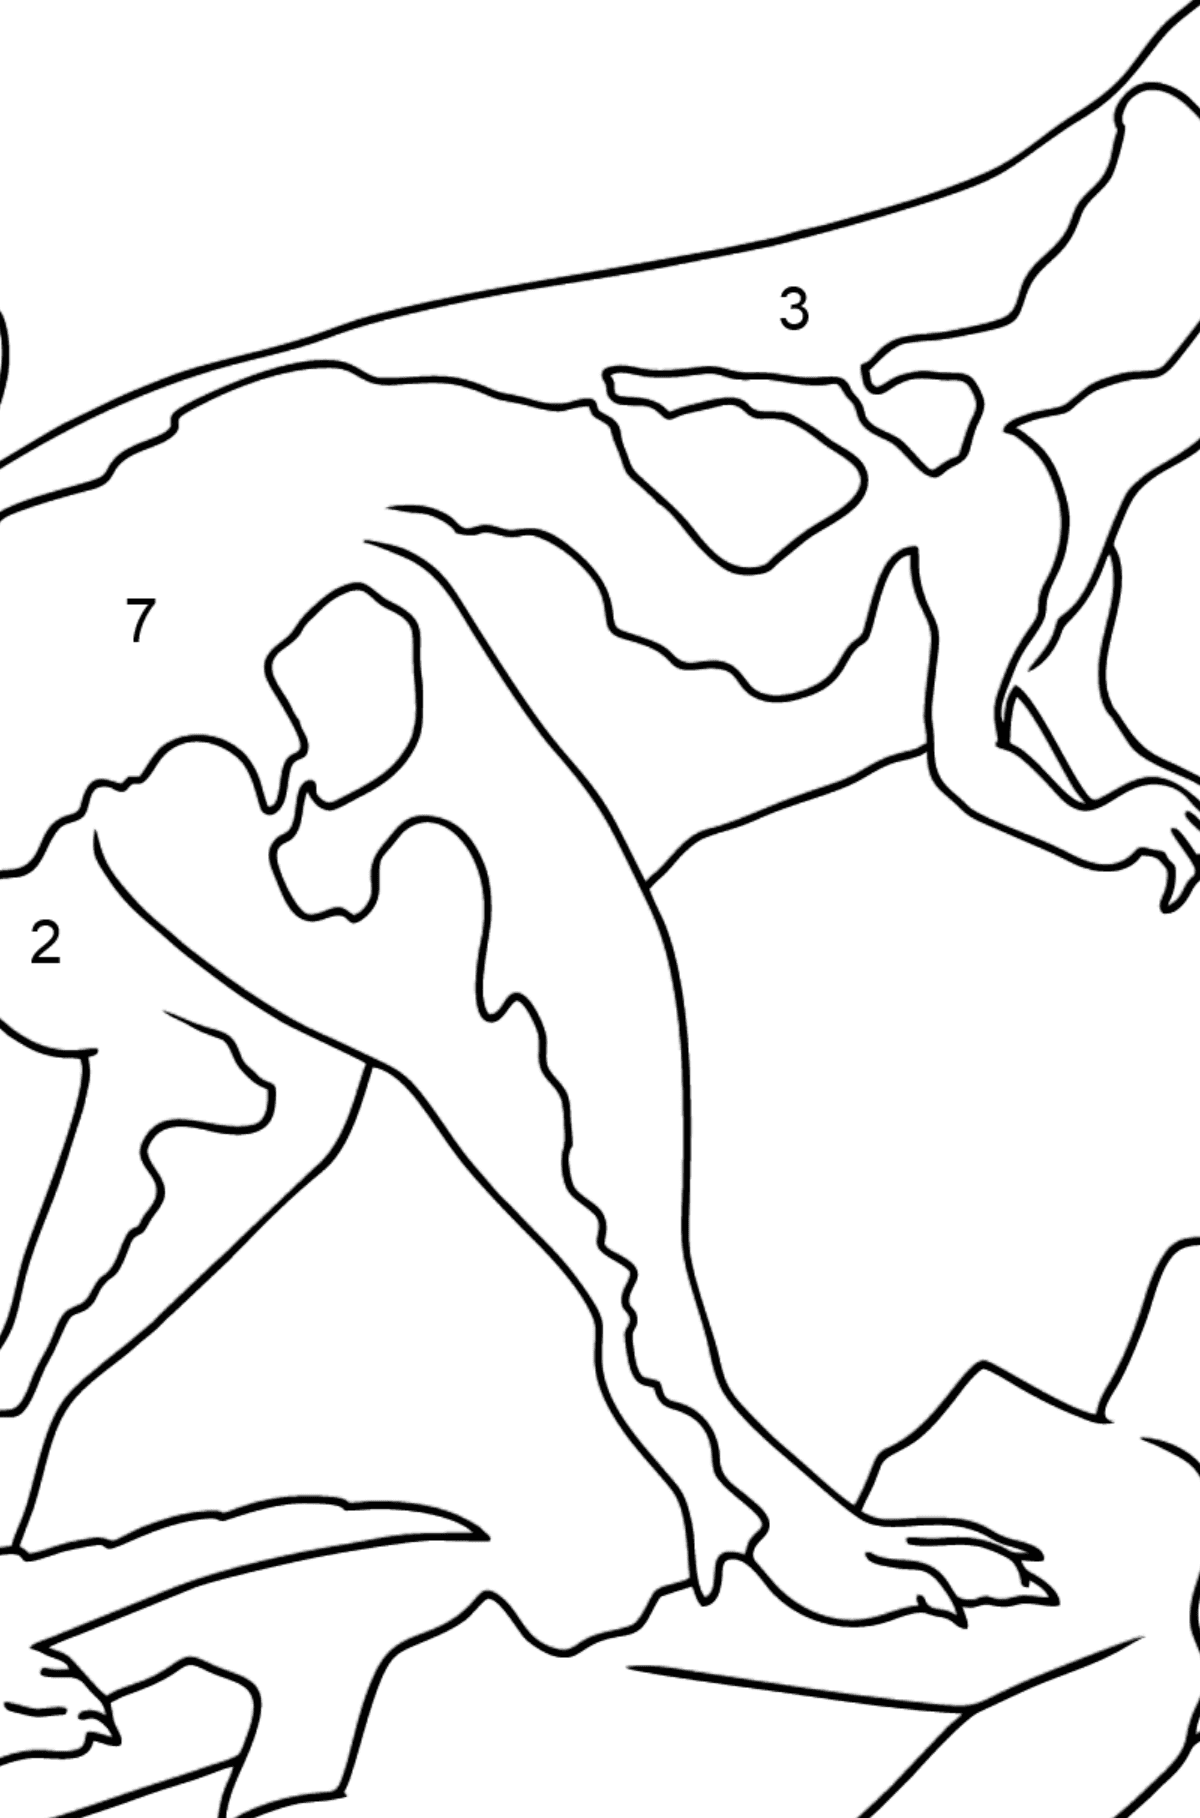 Tyrannosaurus Coloring Page - Coloring by Numbers for Kids